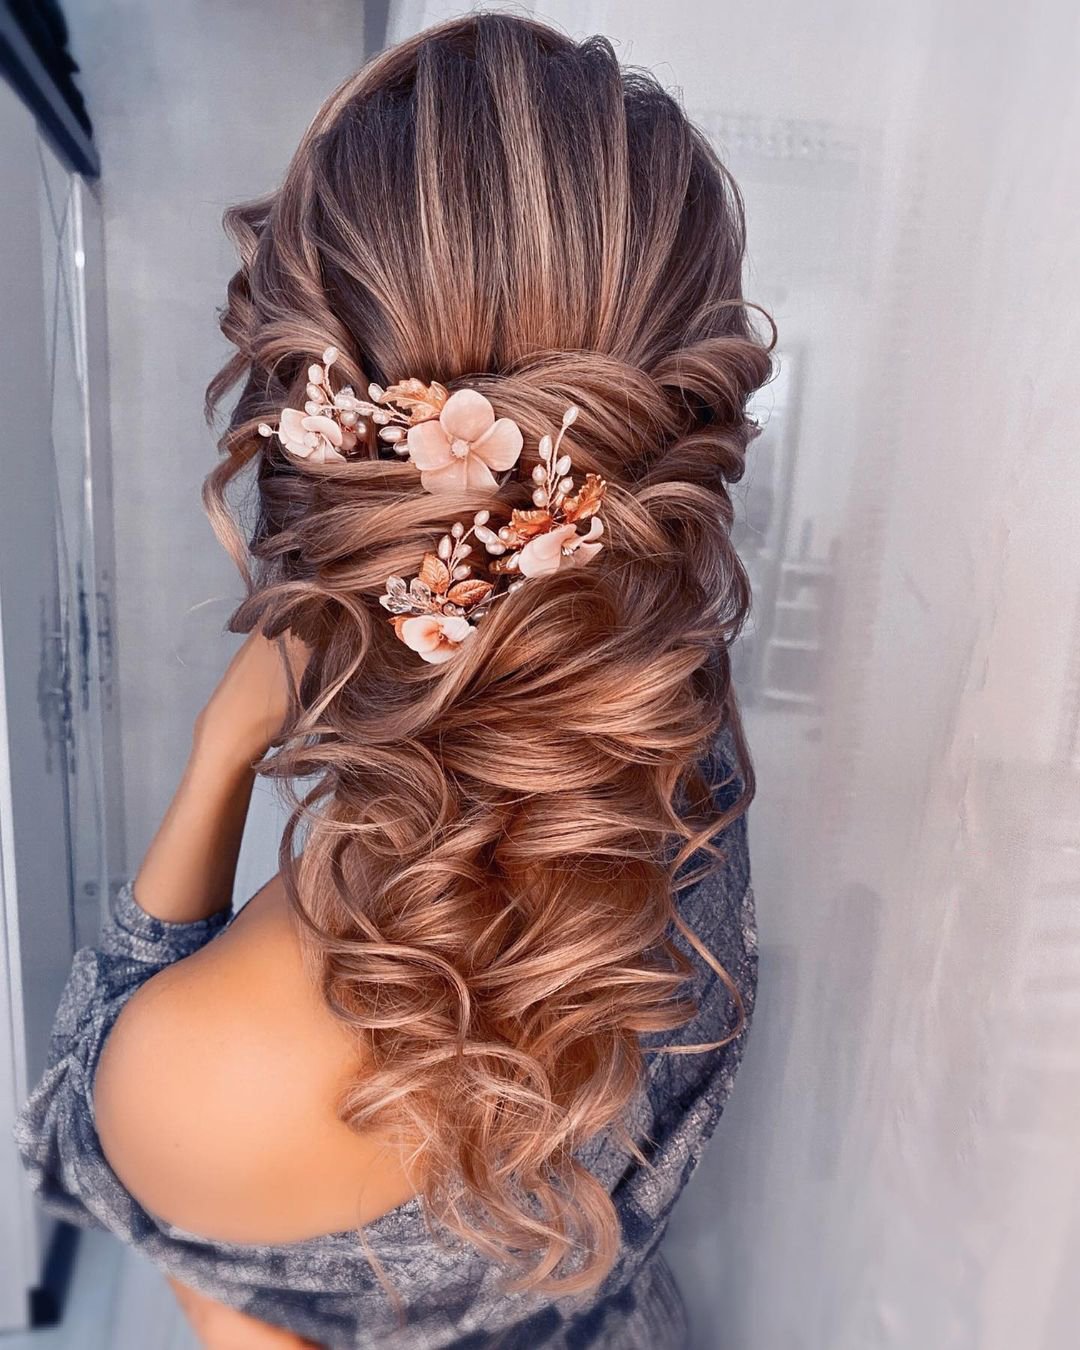 20 Stunning Curly Hairstyles Ideas For Indian Wedding Function | Medium curly  hair styles, Curly hair styles, Hair styles